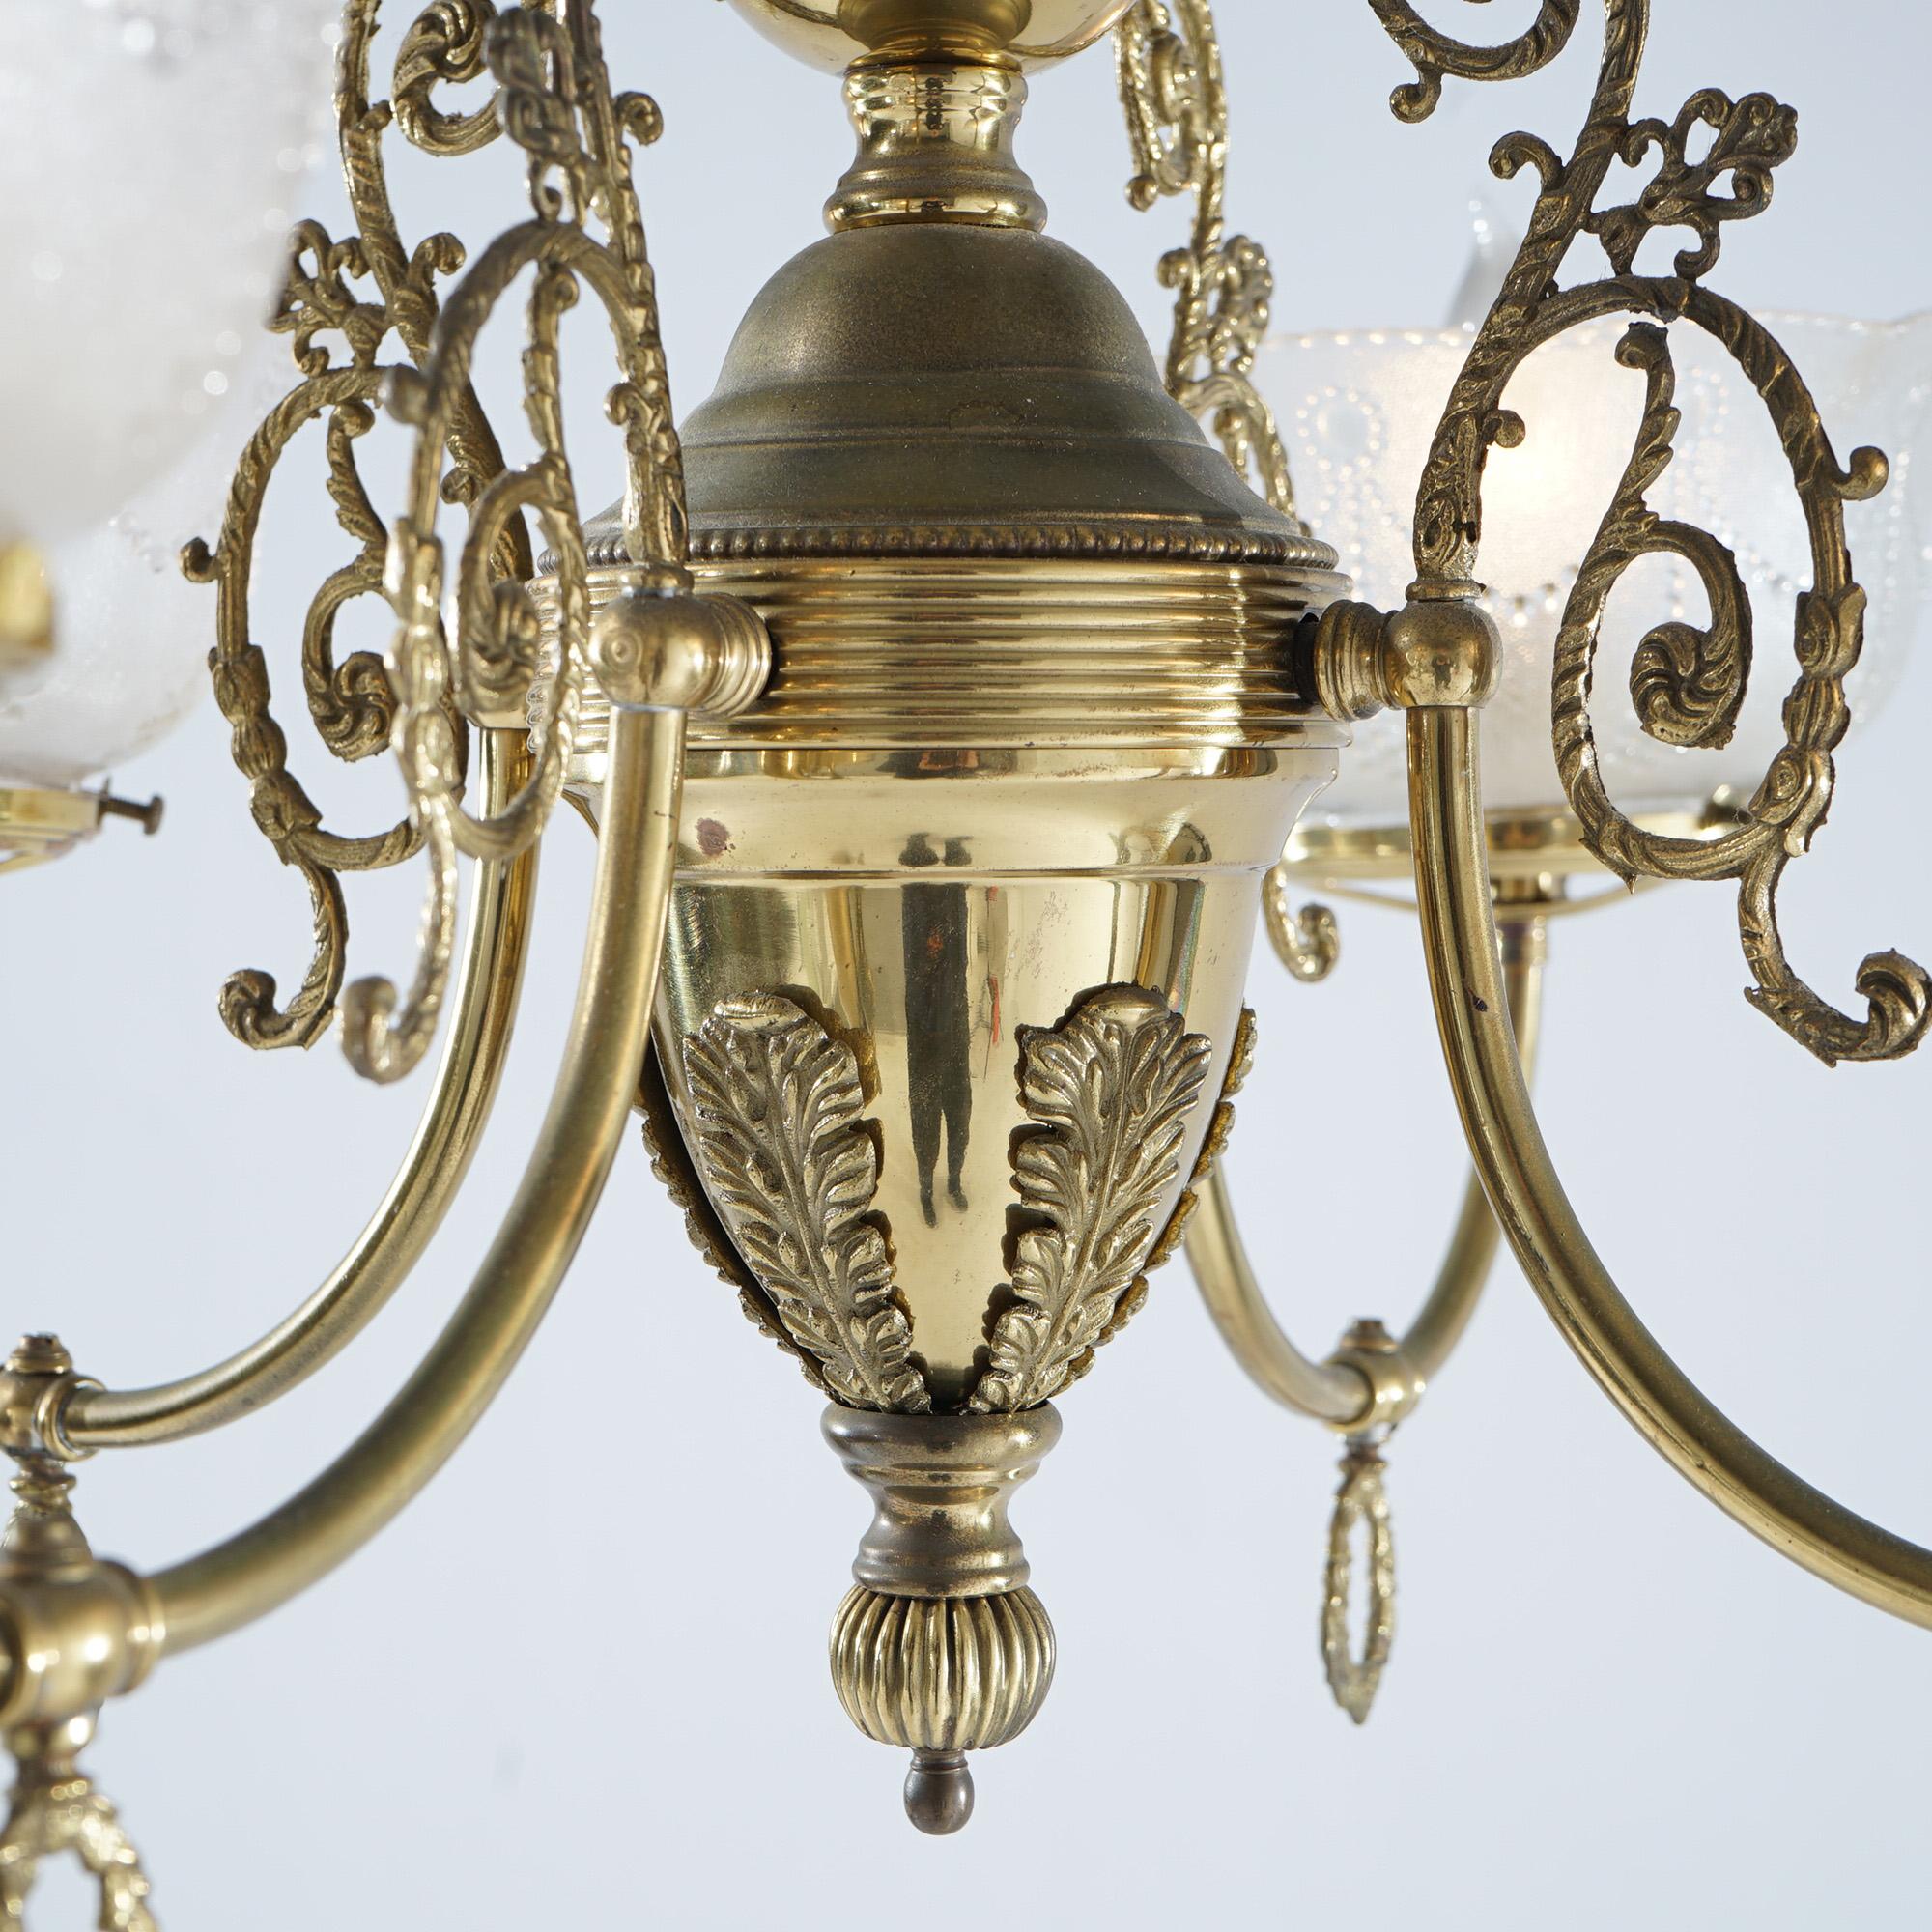 American Antique Brass Four-Light Gas Hanging Fixture, Converted to Electric, 19th C